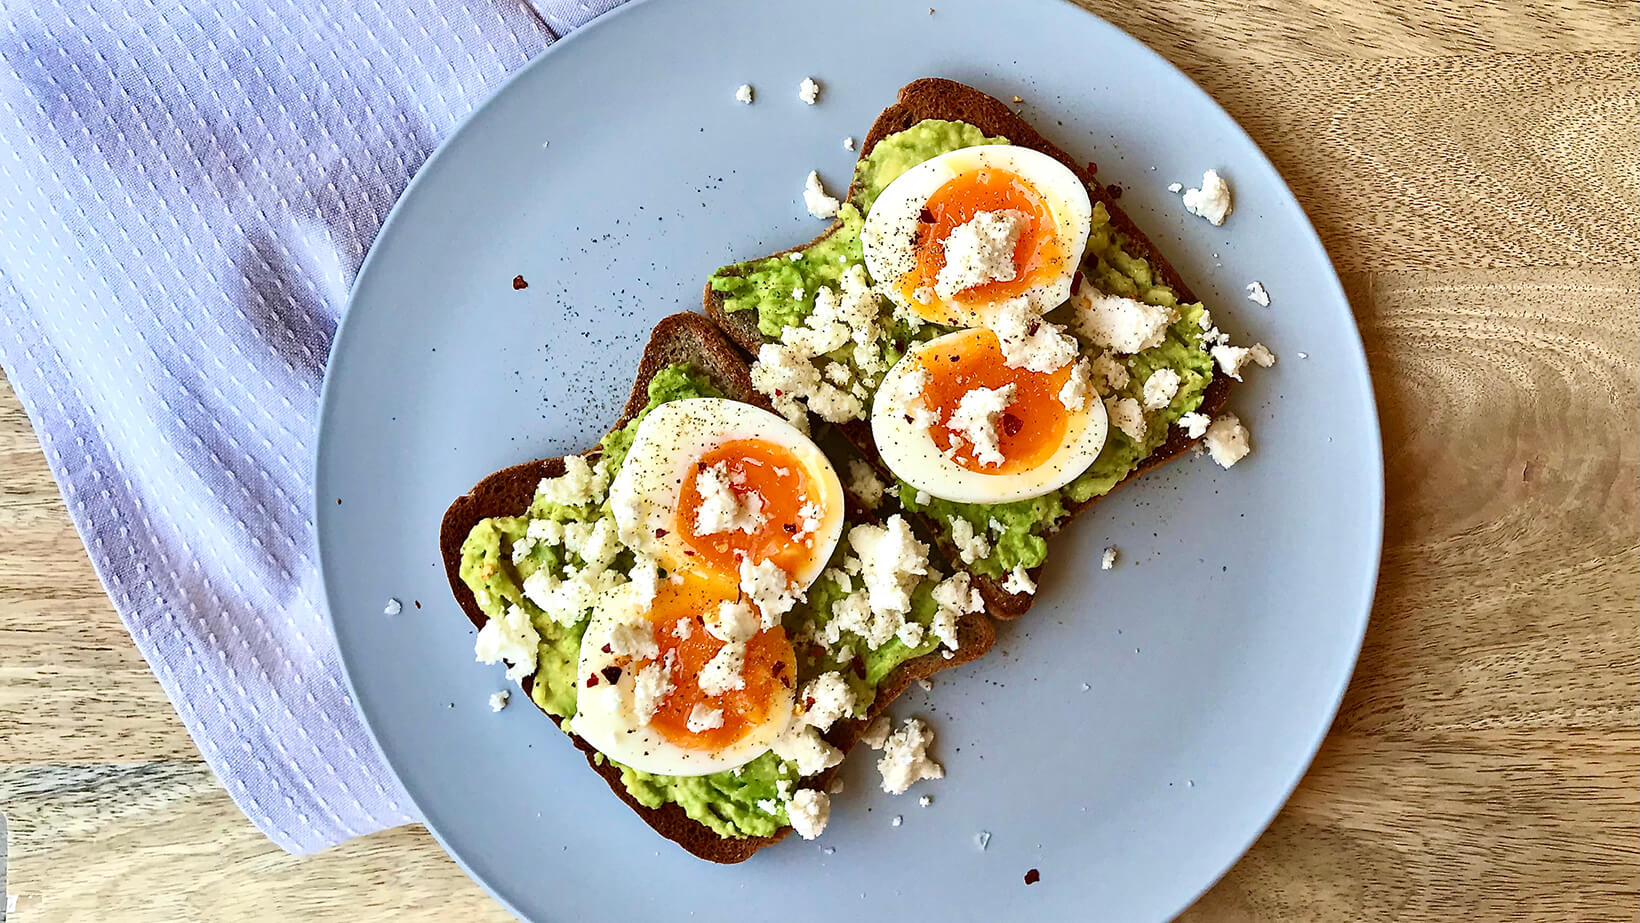 Soft Boiled Eggs, Avocado & Goat's Cheese On Toast